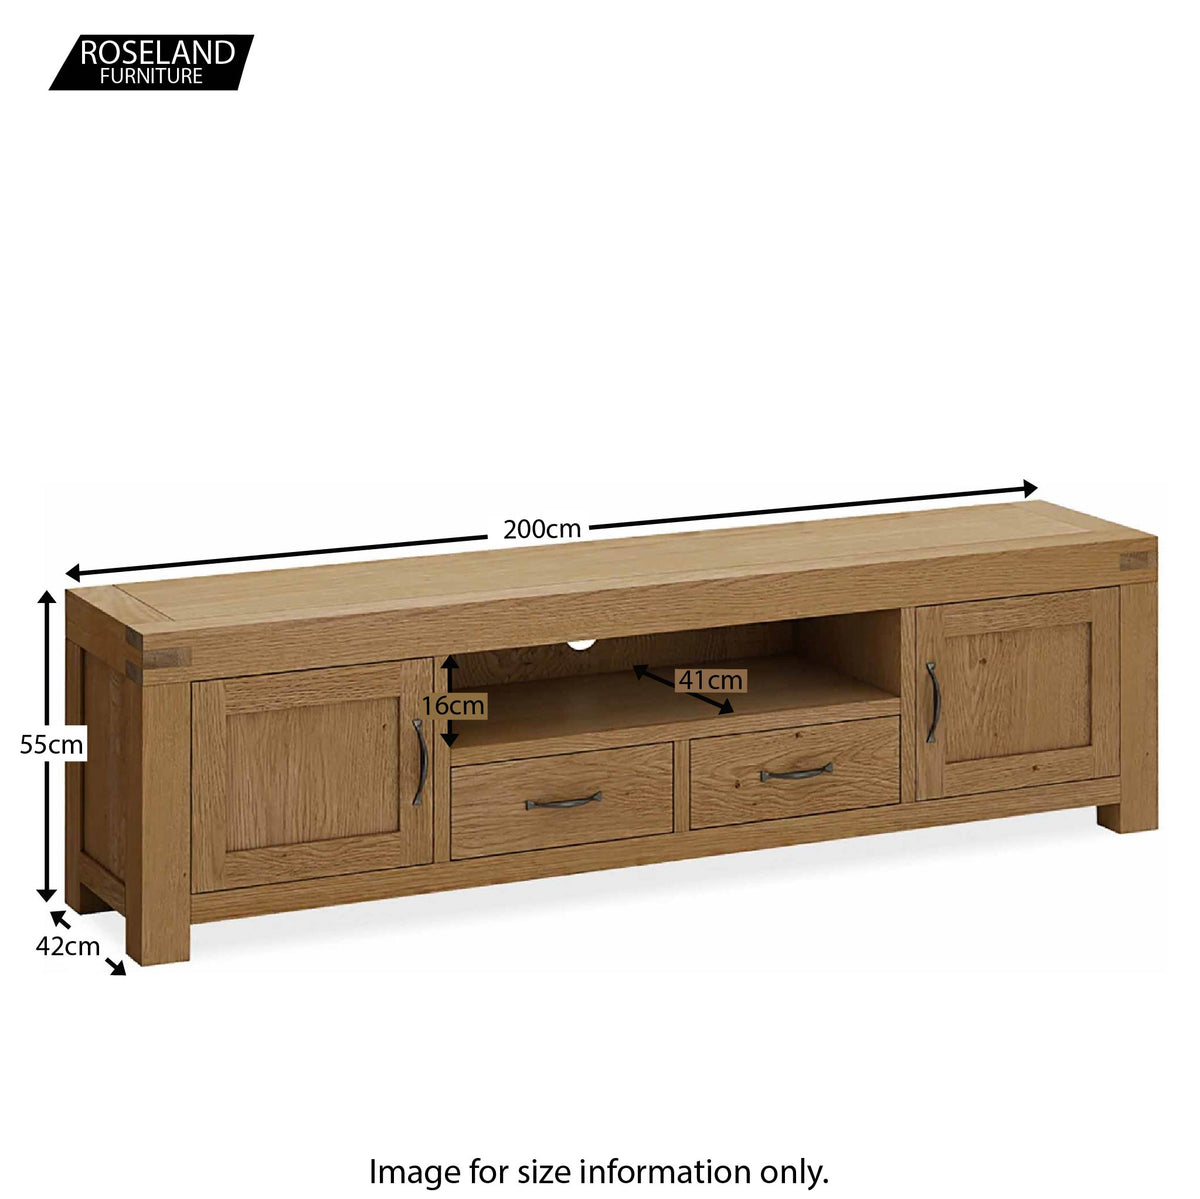 Abbey Grande 200cm Large TV Stand - Size guide